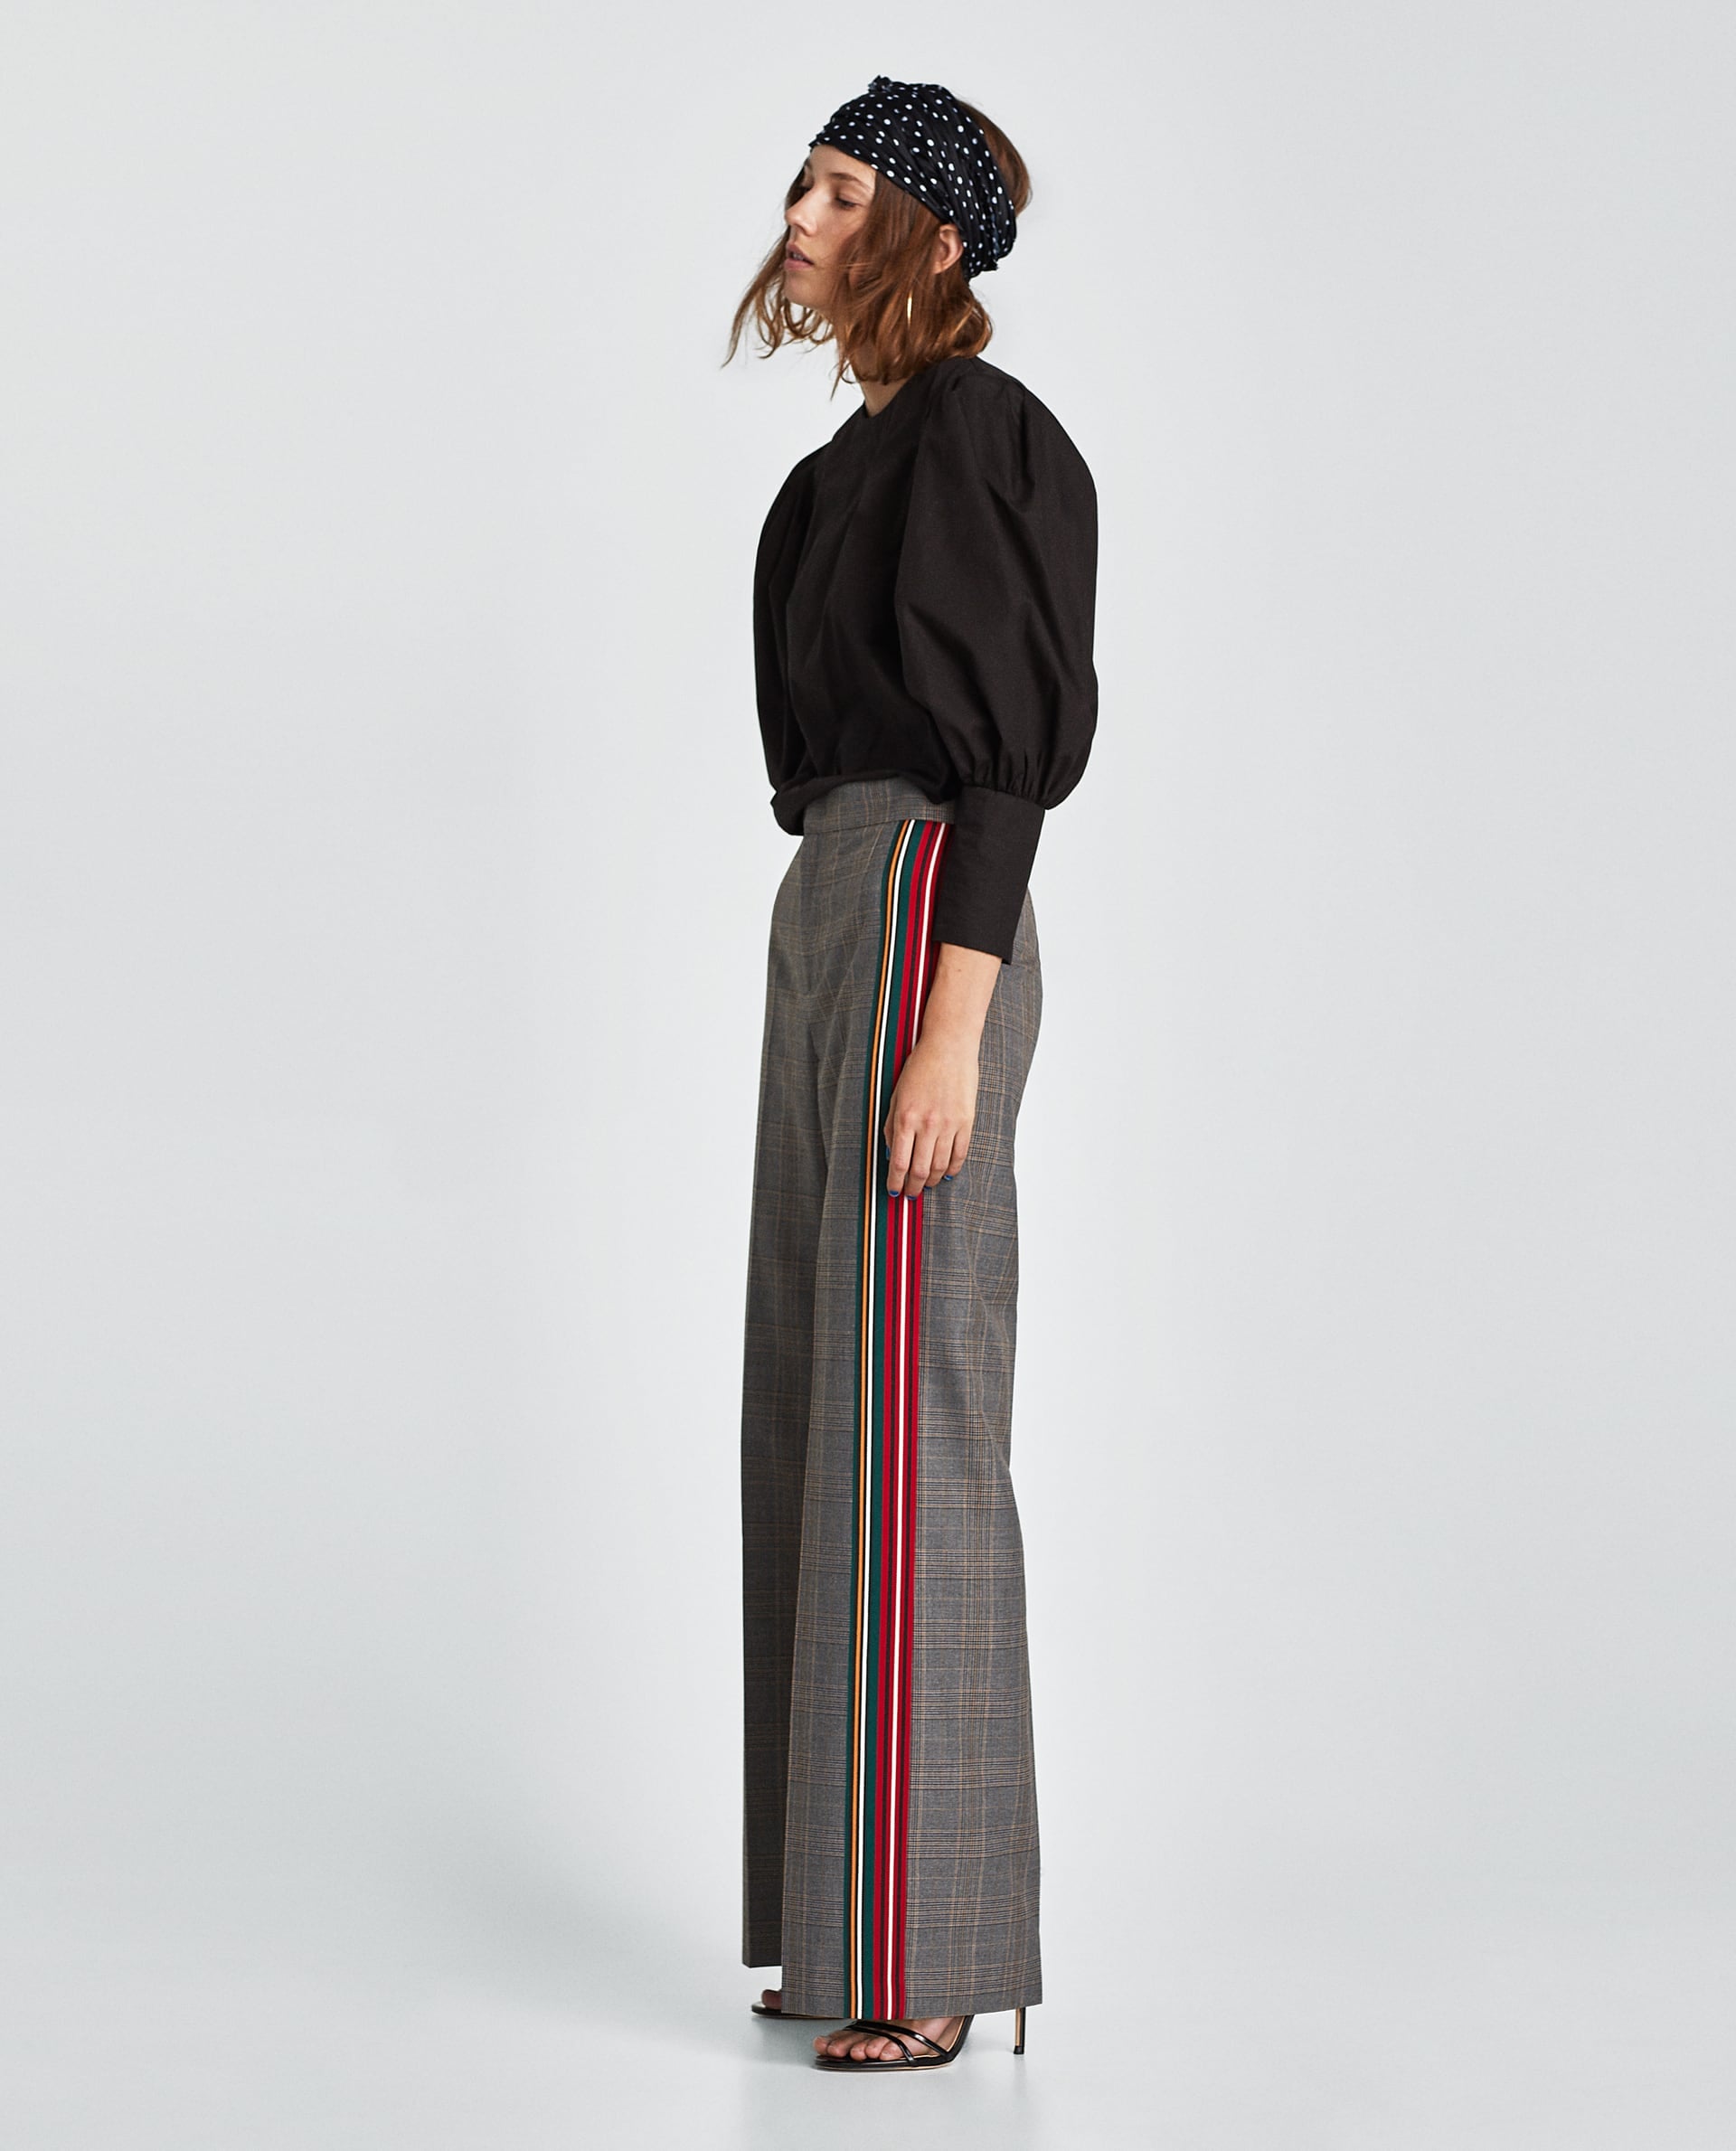 Zara Floral Trousers with Contrast Stripe  UFO No More